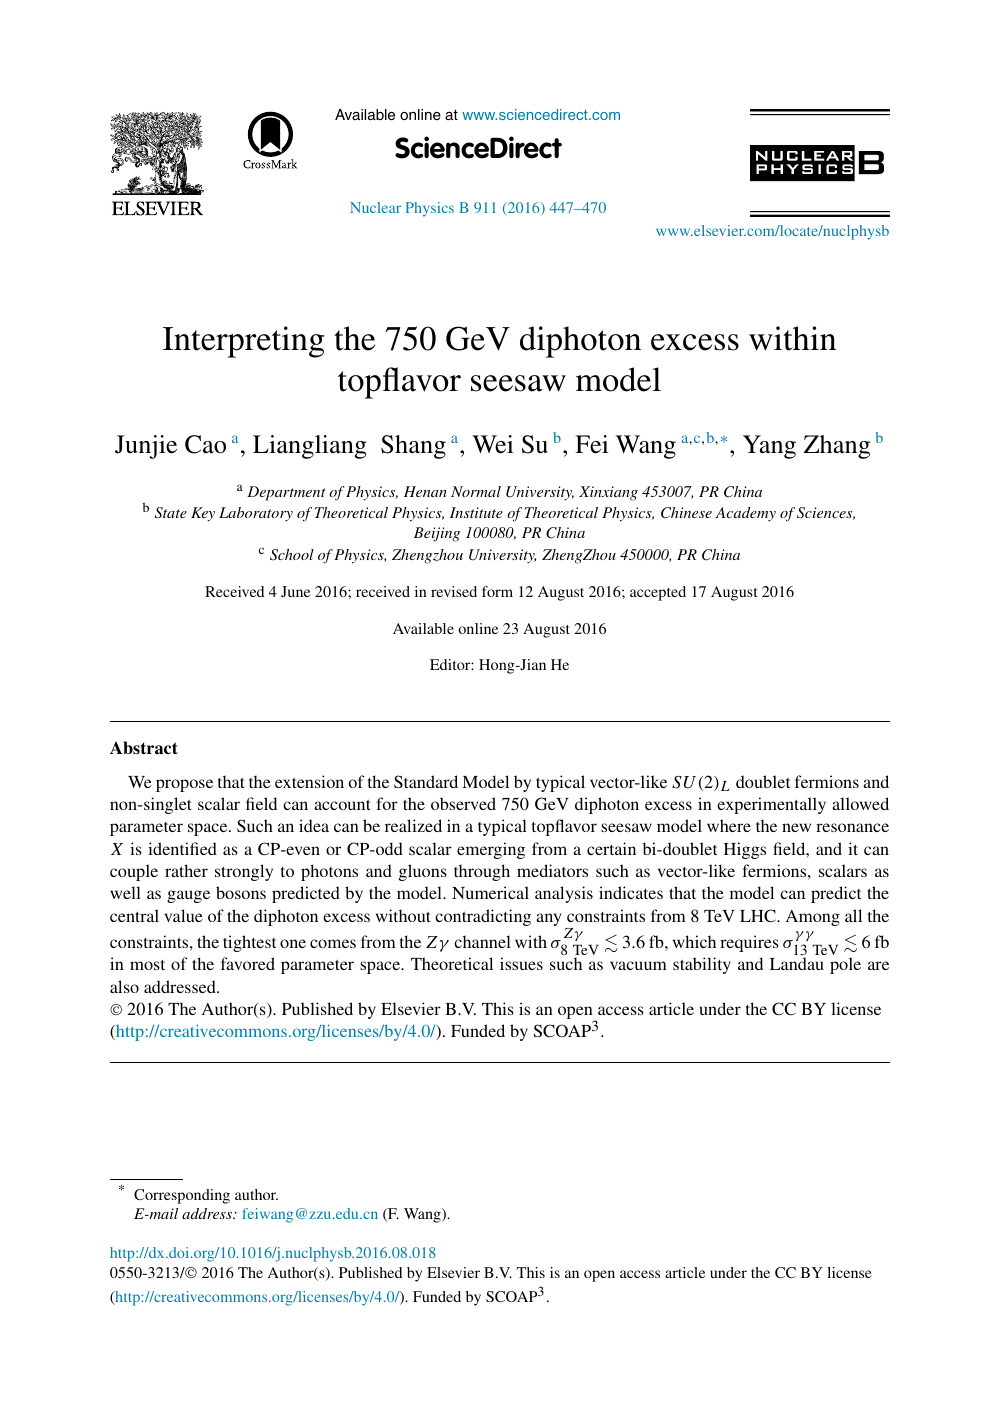 Interpreting The 750 Gev Diphoton Excess Within Topflavor Seesaw Model Topic Of Research Paper In Physical Sciences Download Scholarly Article Pdf And Read For Free On Cyberleninka Open Science Hub